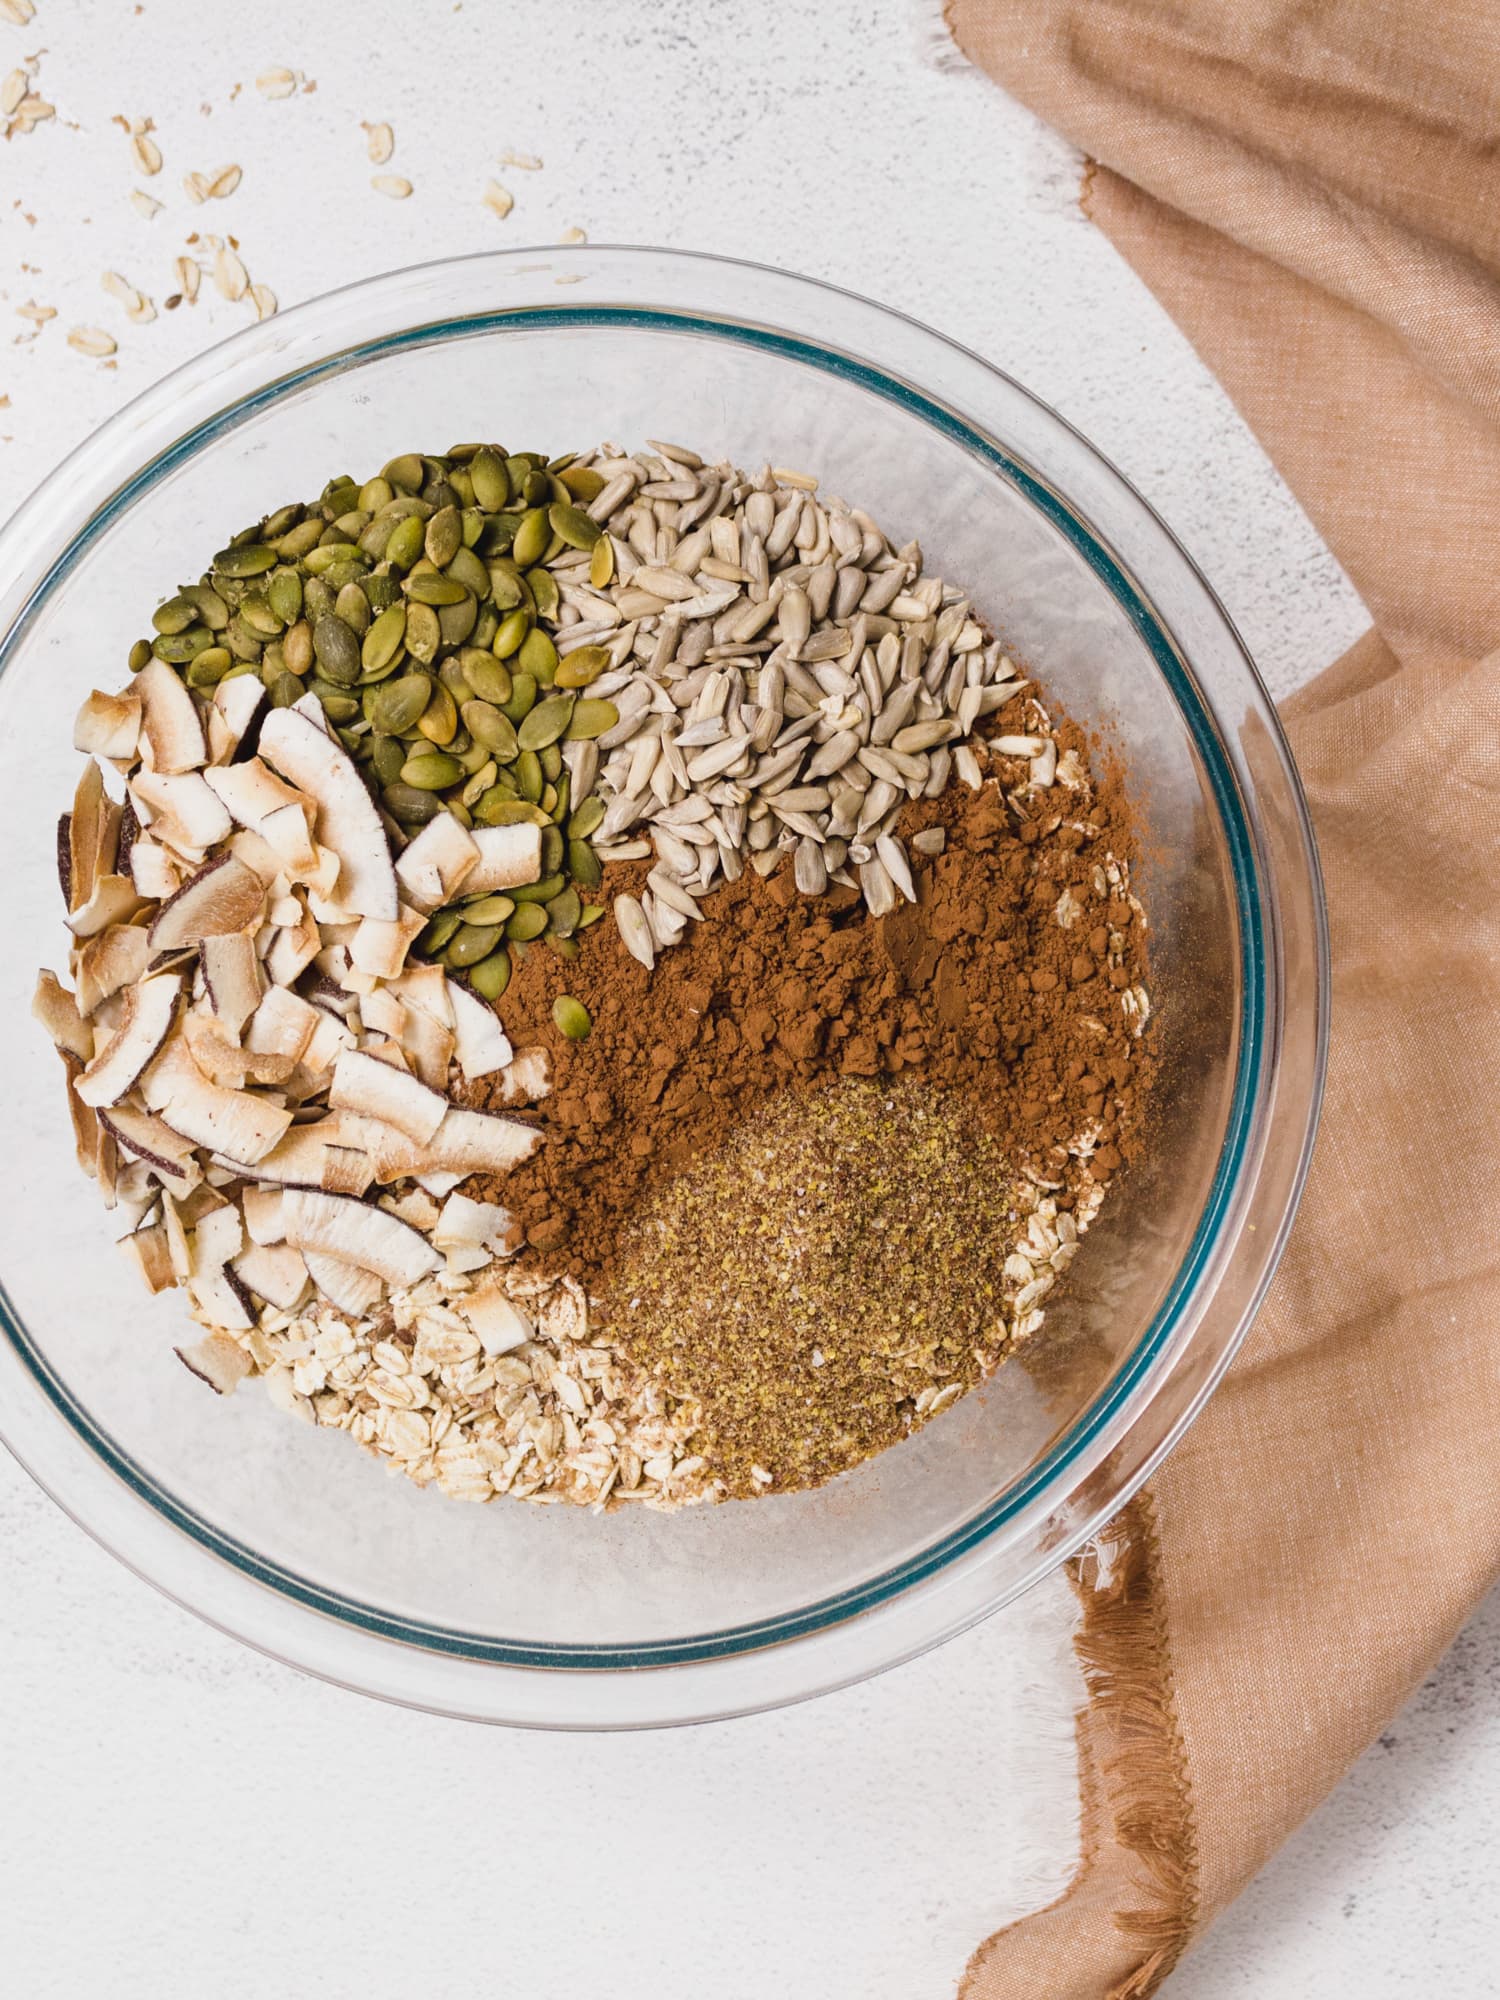 Dry ingredients in a bowl. Coconut smiles, pumpkin seeds, sunflower seeds, cocoa powder, ground flaxseed, and oats.  